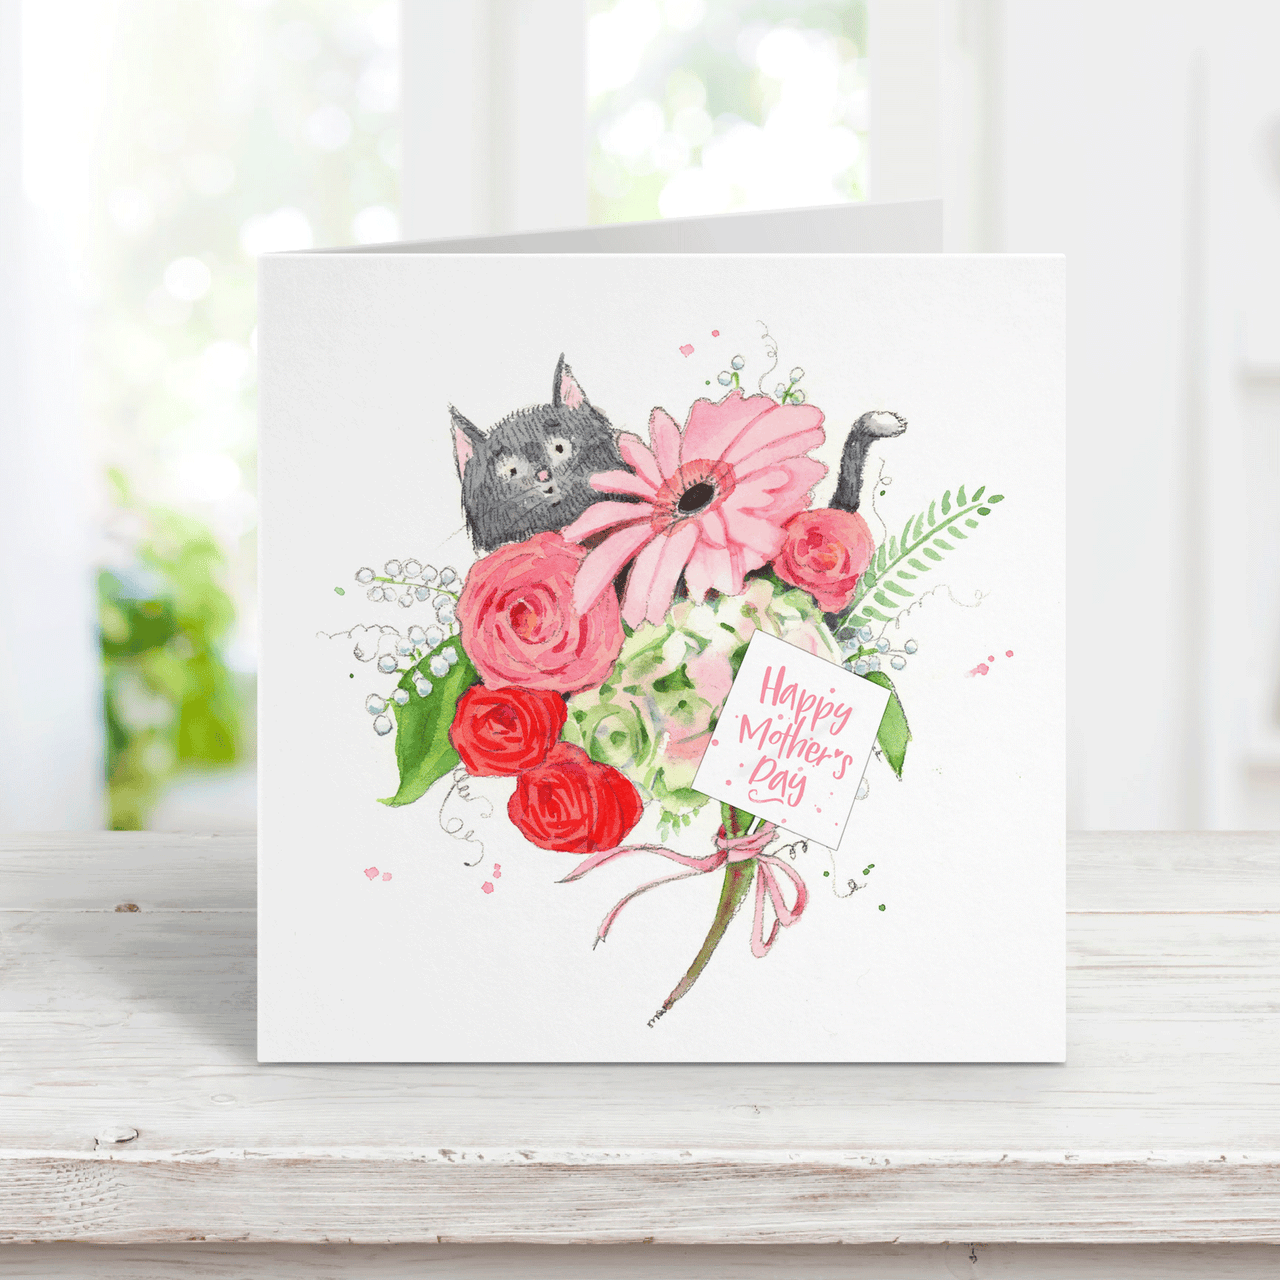 watercolor mothers day card of a whimsical gray cat peeking out from behind a bouquet of pink and red flowers with a little tag that says Happy Mothers Day